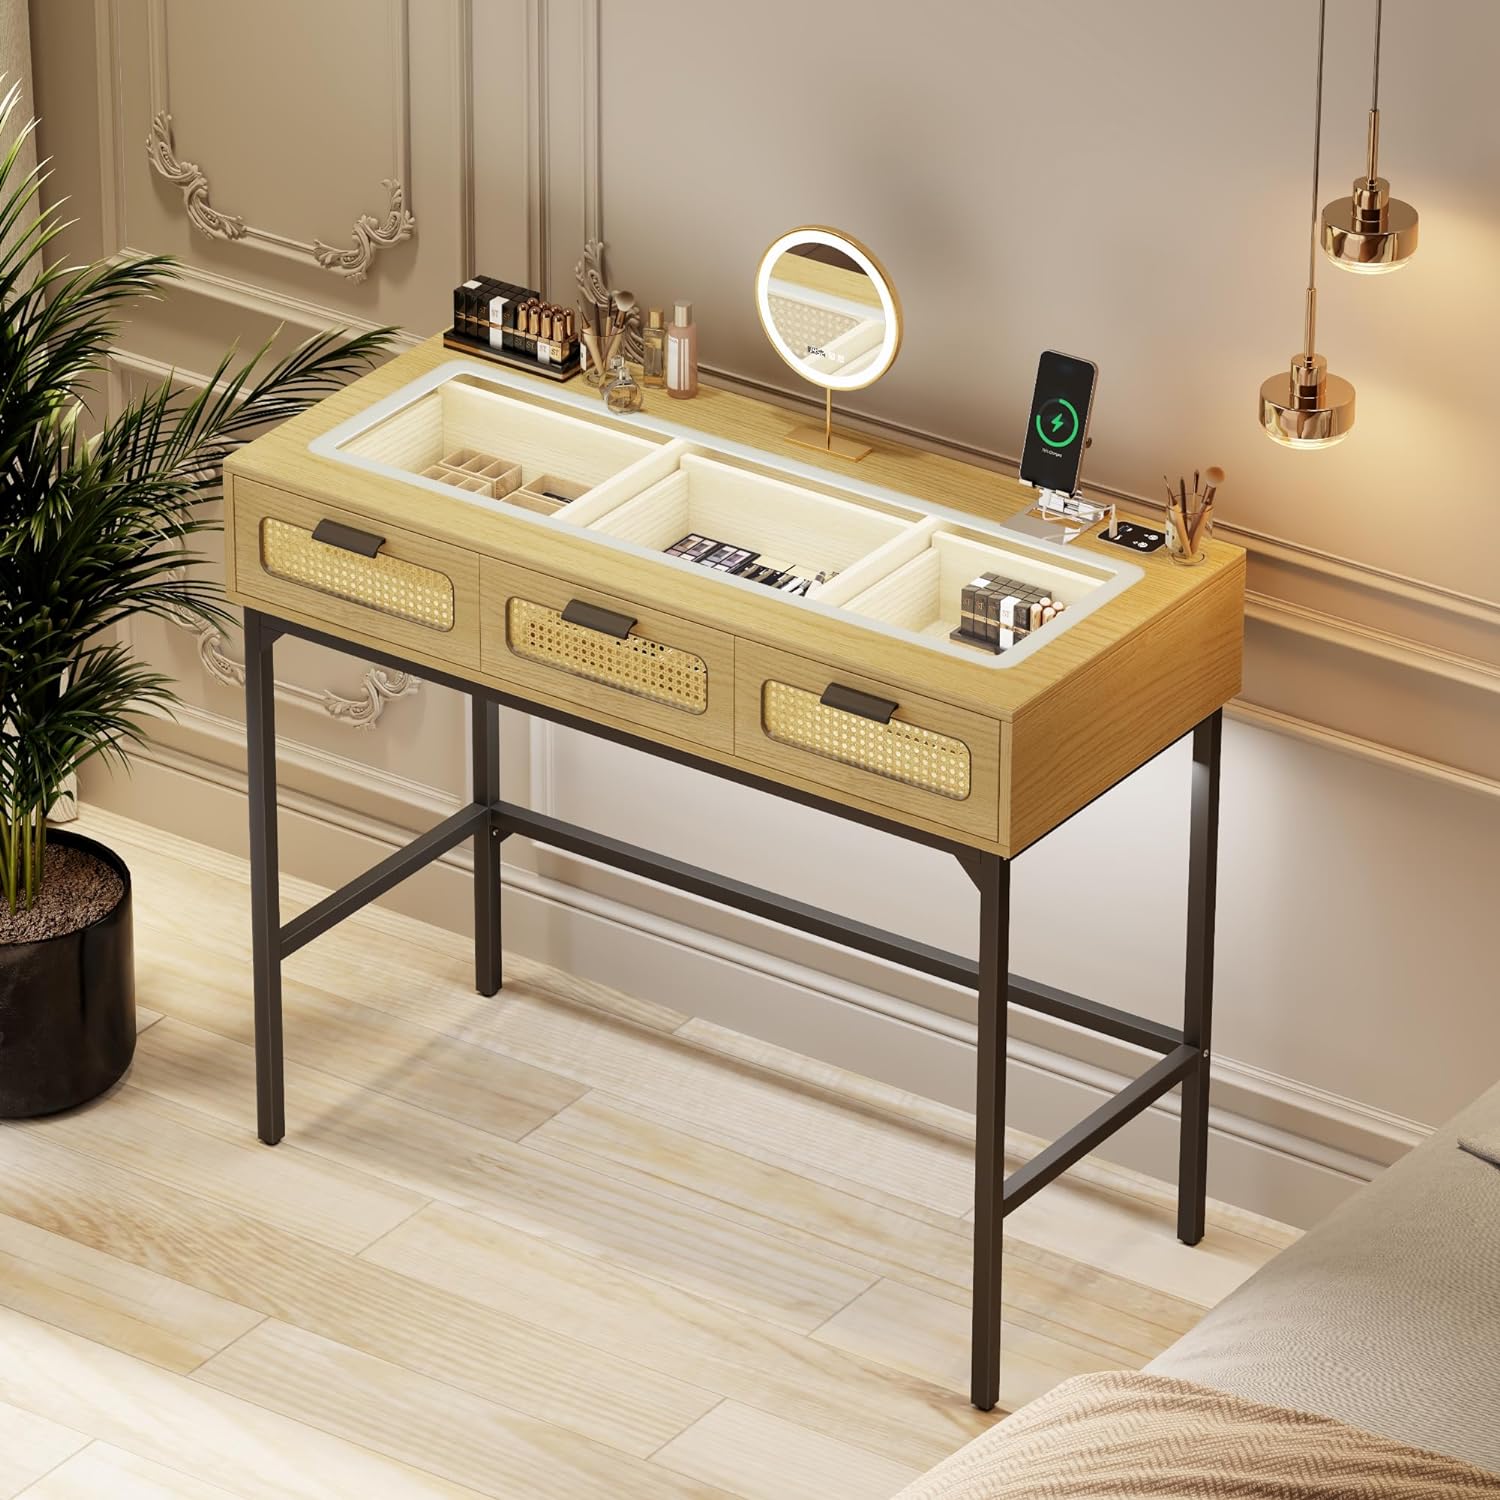 Makeup Vanity with LED Lights - Vanity Desk with Glass Top Design & Charging Station, Wooden Makeup Table with Rattan Drawers, Bedroom Furniture Dressing Table Office Desk